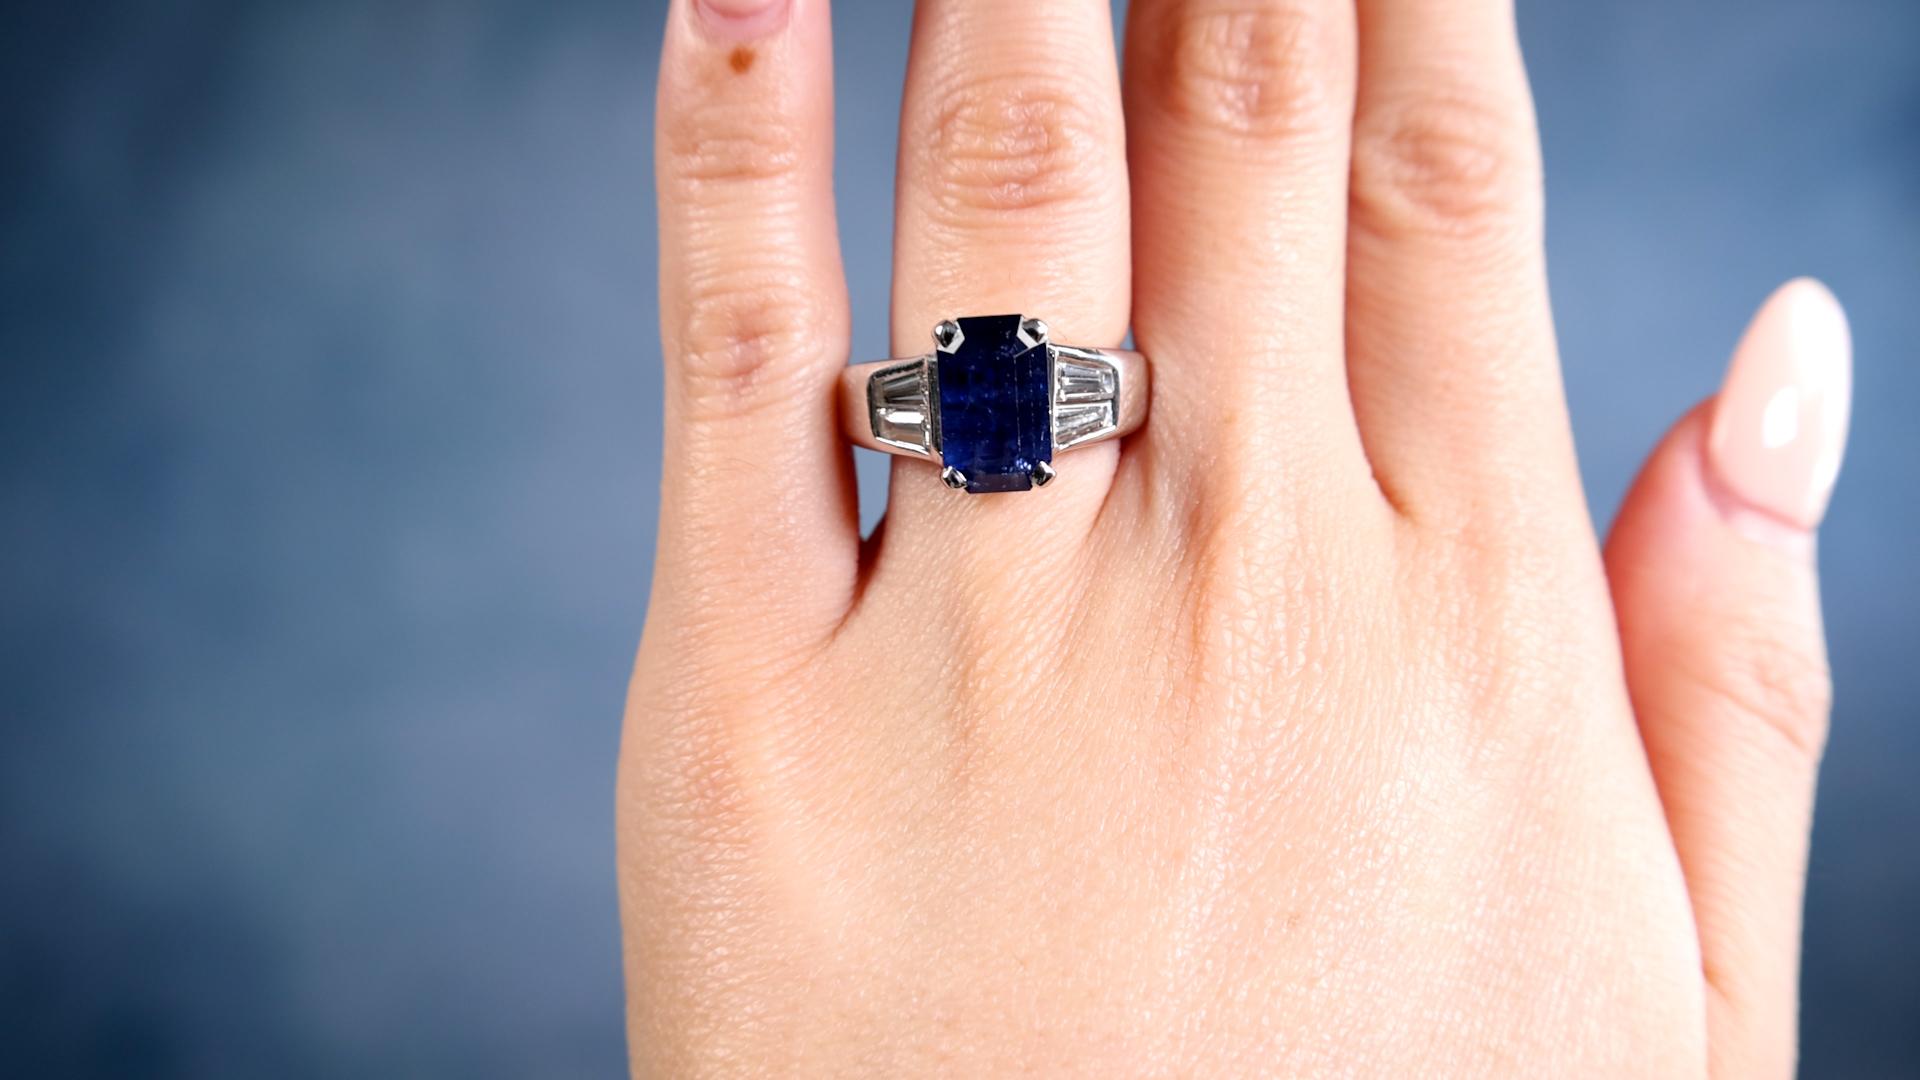 One Vintage GIA 4.71 Carat Ceylon Sapphire Diamond 14k White Gold Ring. Featuring one GIA octagonal step cut sapphire of 4.71 carats, accompanied by GIA #6234196541 stating the sapphire is of Ceylon (Sri Lanka) origin. Accented by four tapered